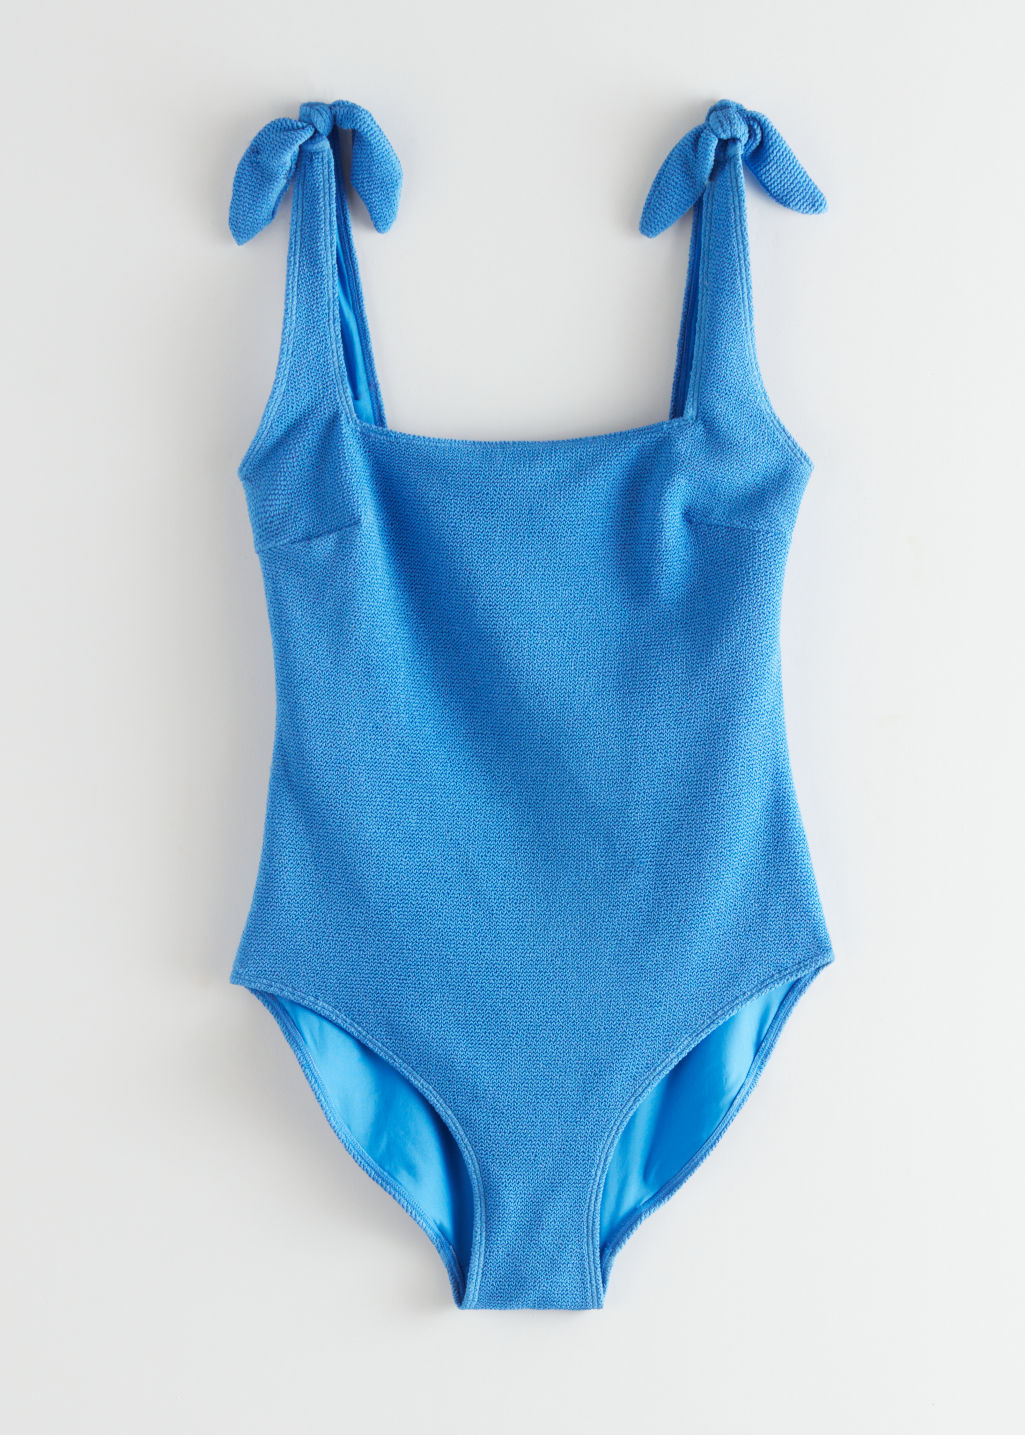 Bow Tie Swimsuit - Blue - Swimsuits - & Other Stories